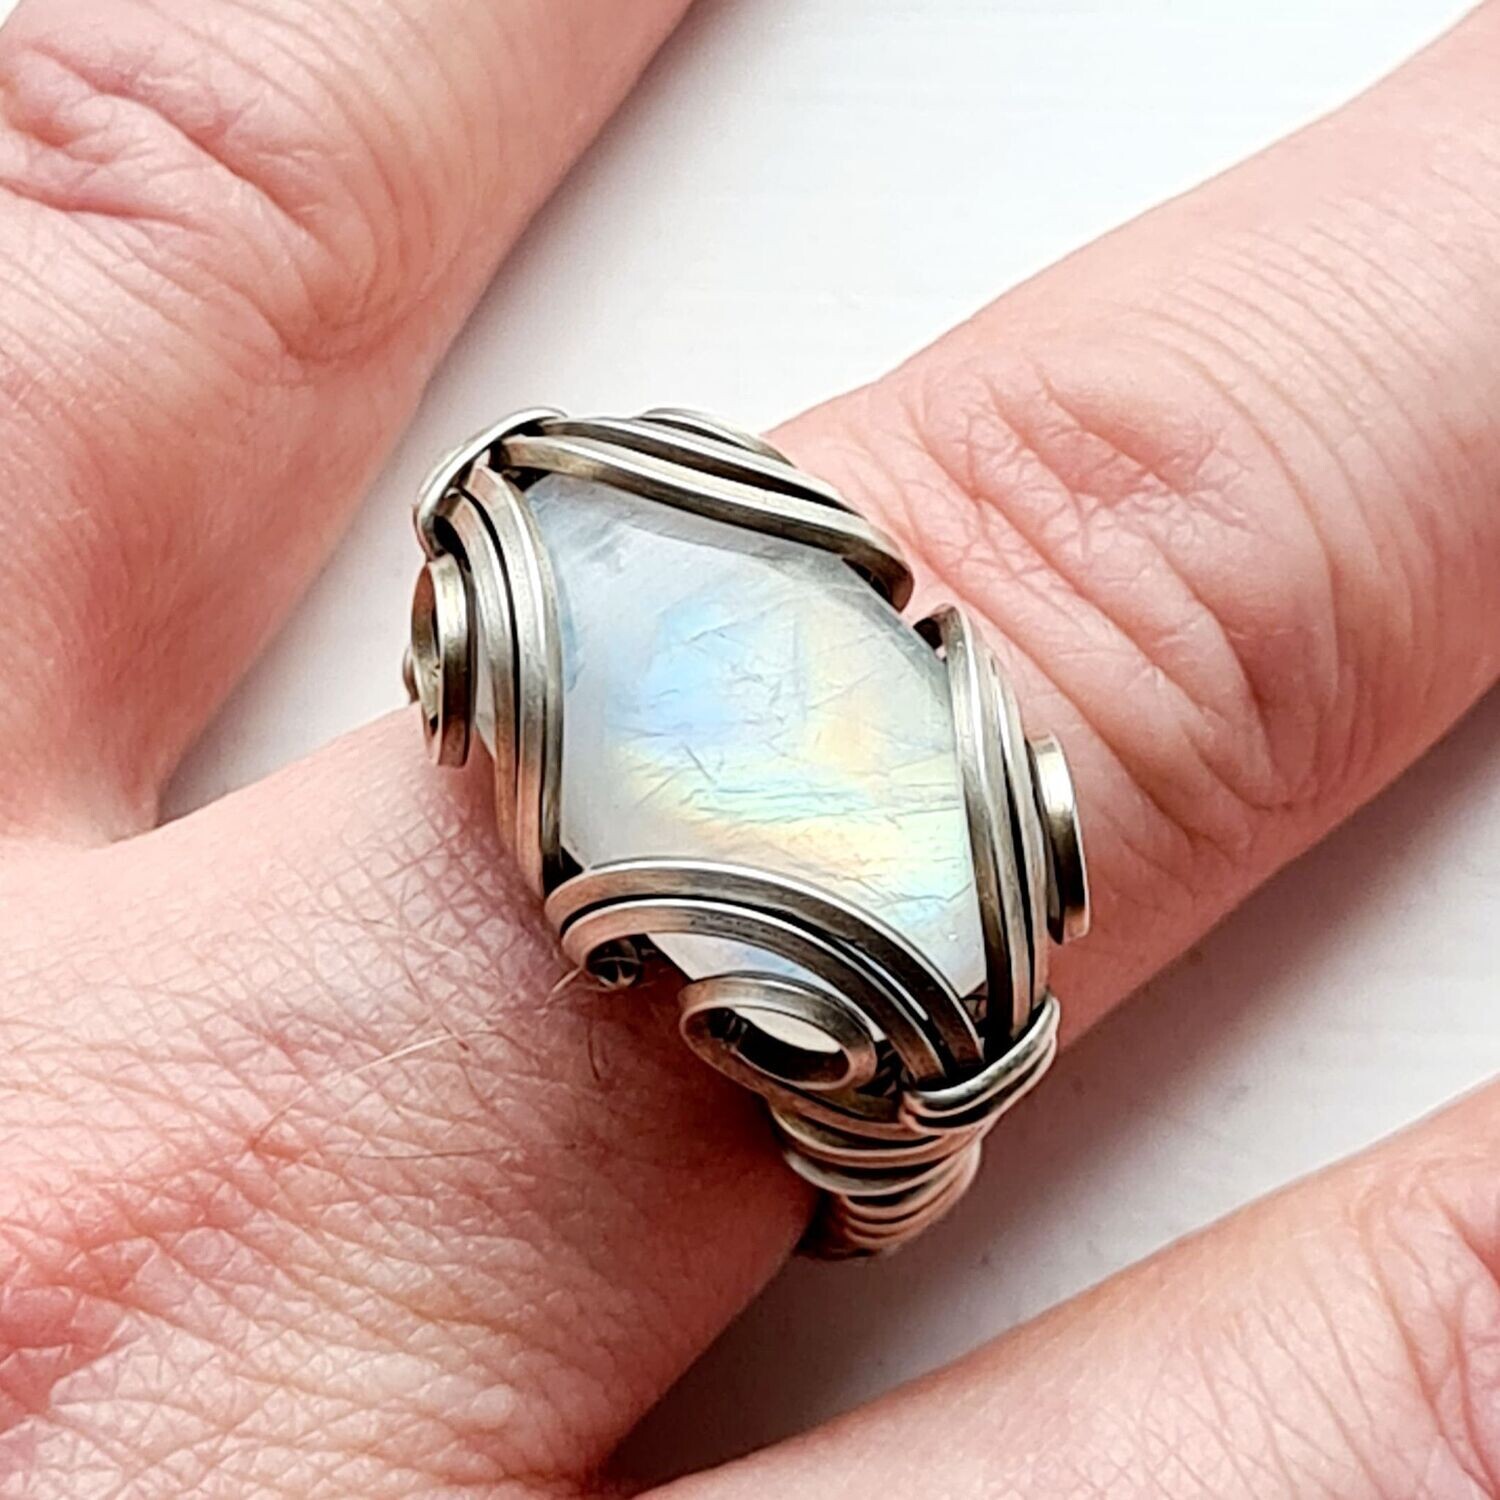 Rainbow Moonstone ring in antiqued Sterling Silver - Size R/59/9 to S/60/9.5